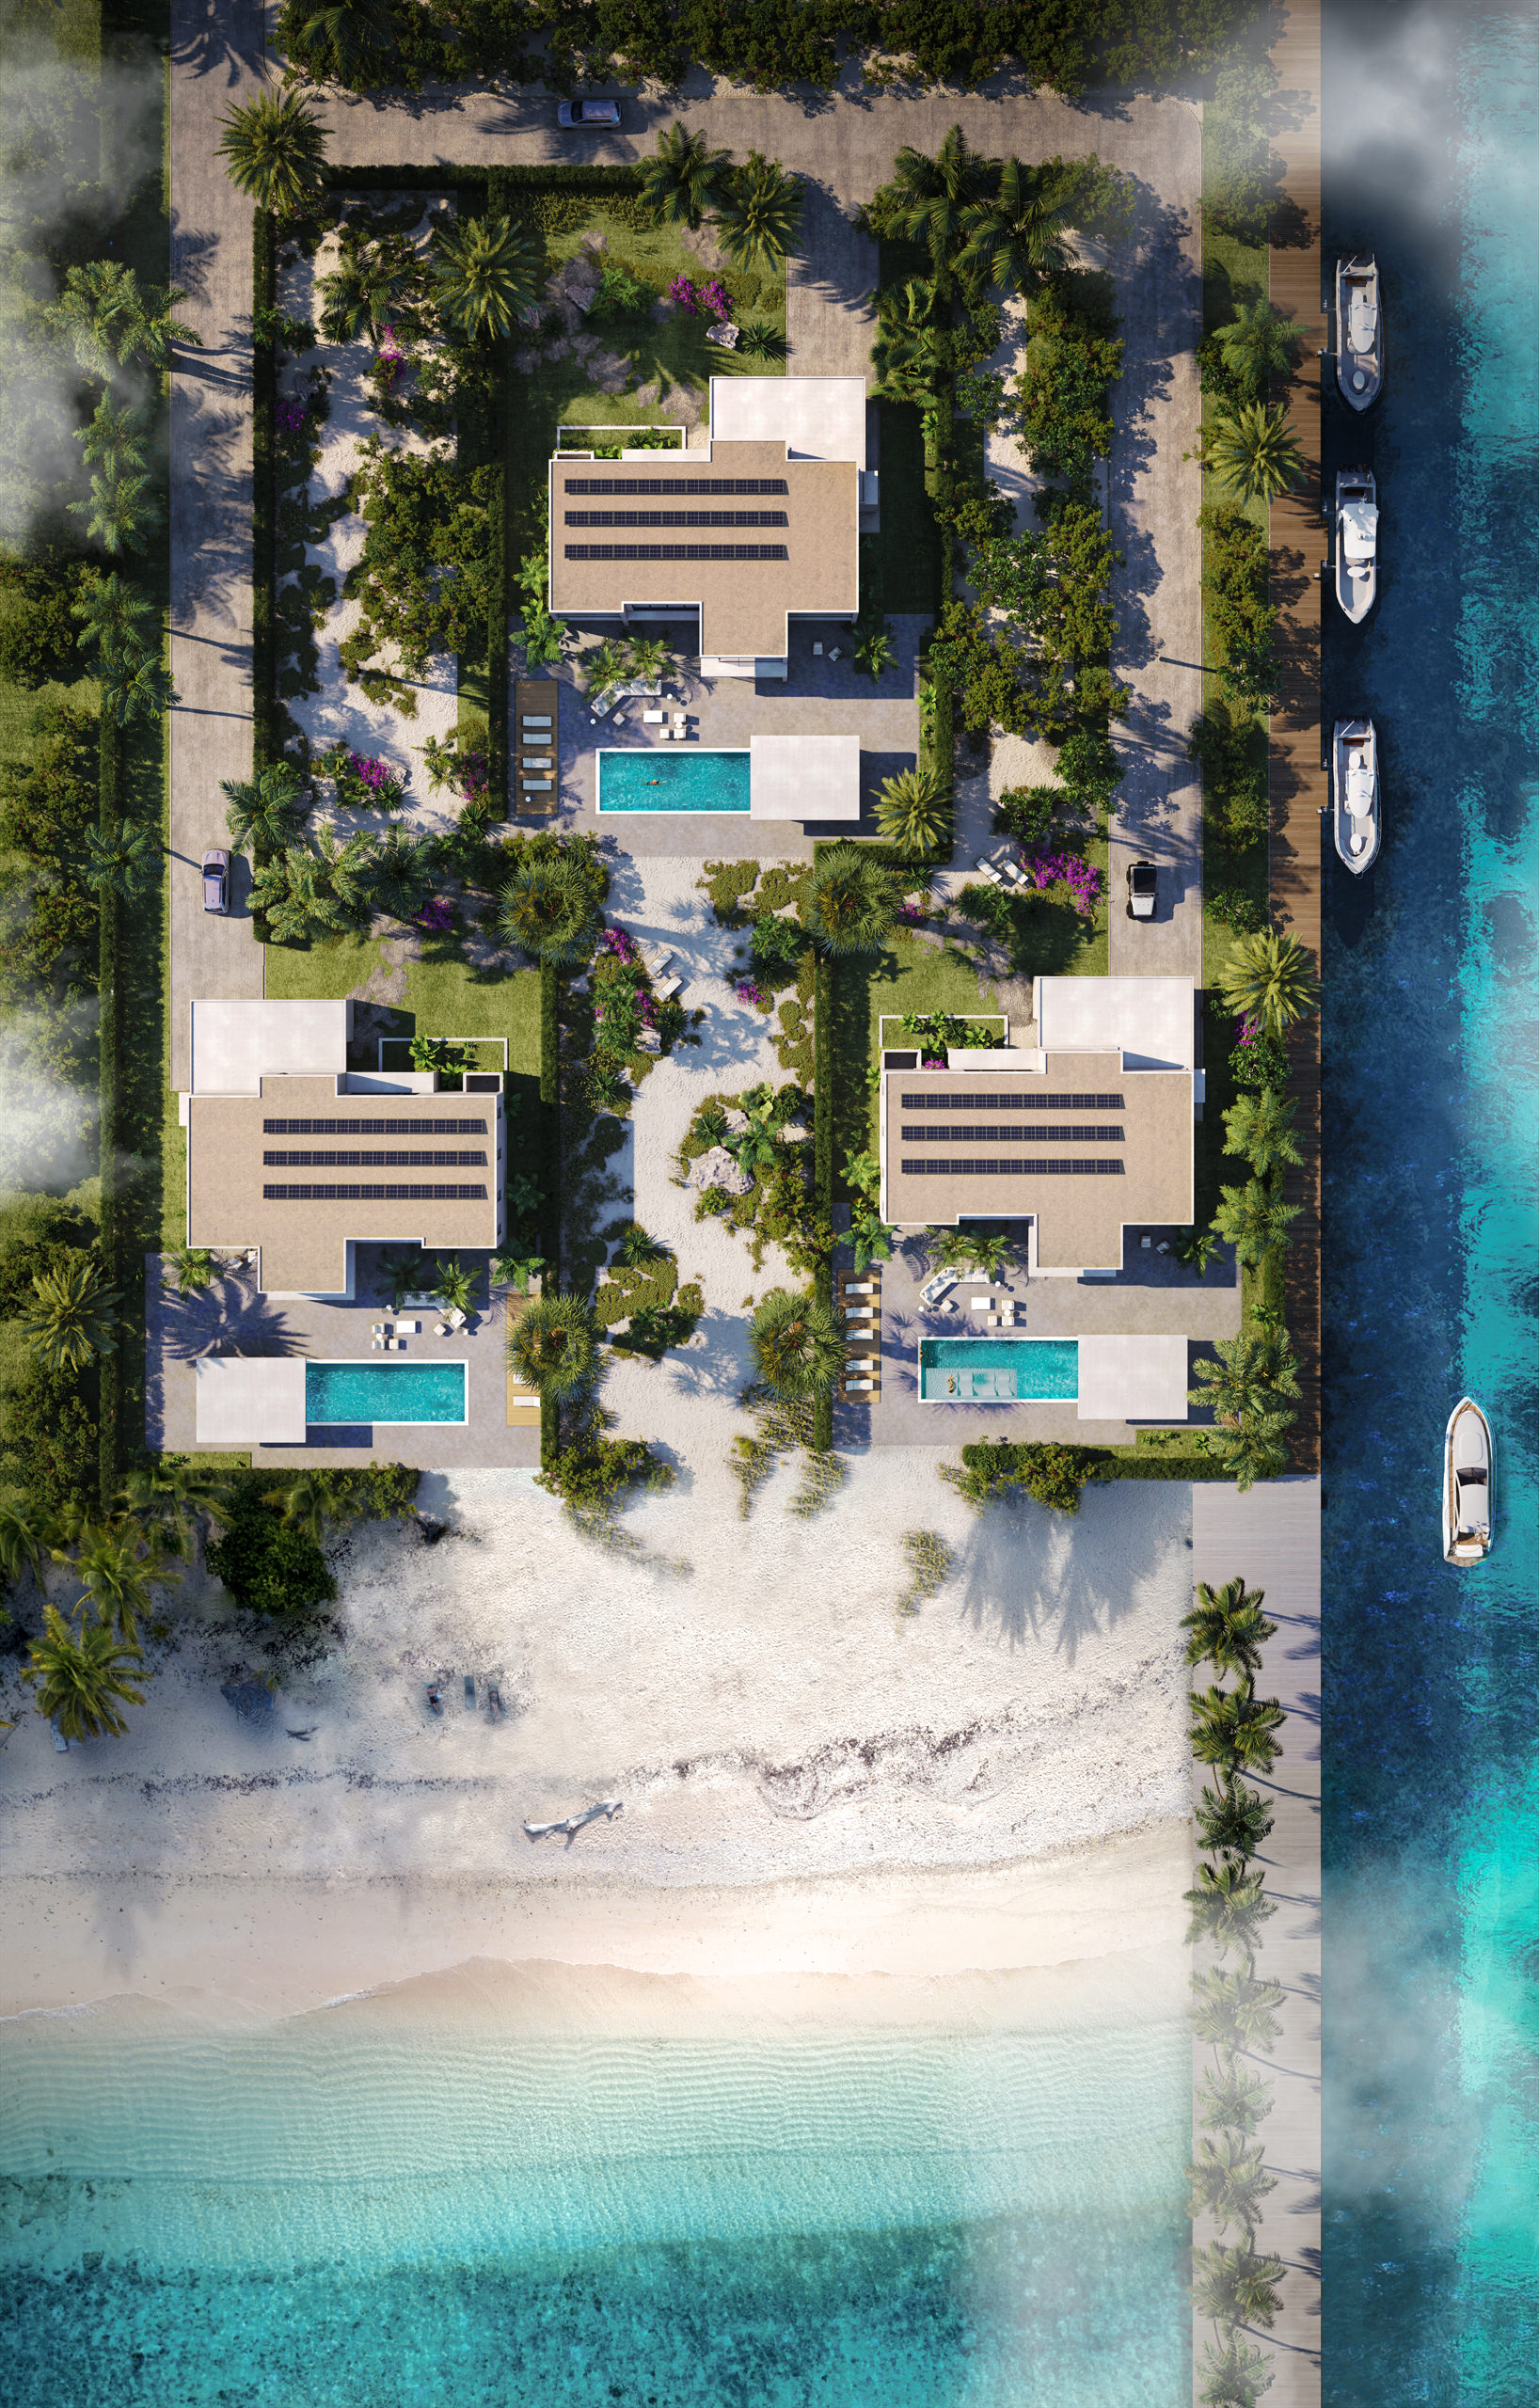 Vacation dream homes in Turks and Caicos visualized from a bird's eye view